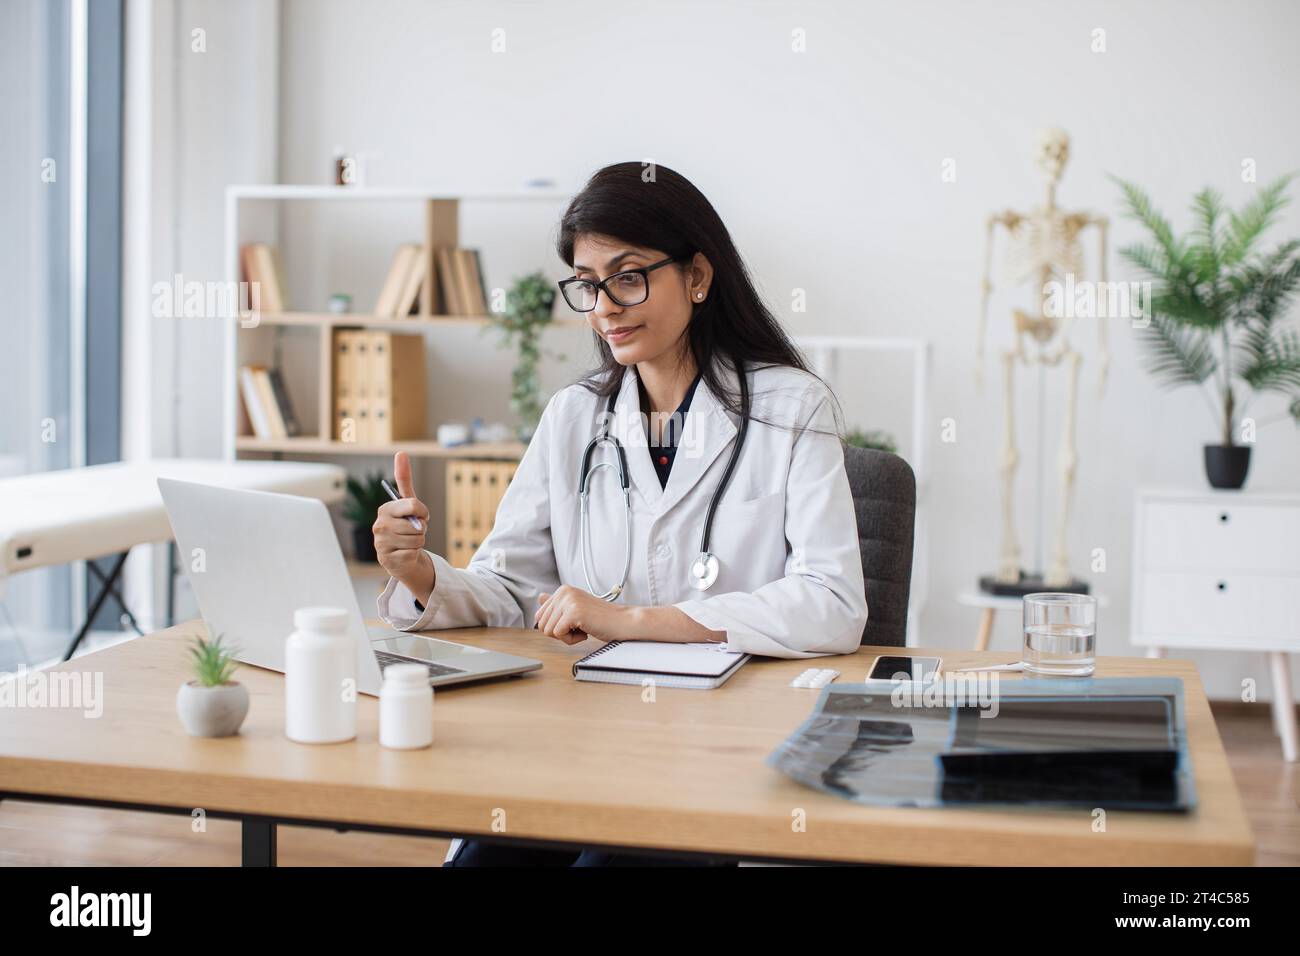 Competent doctor using modern laptop and gesturing during online video consultation. Indian woman in medical uniform telling about home treatment plan Stock Photo